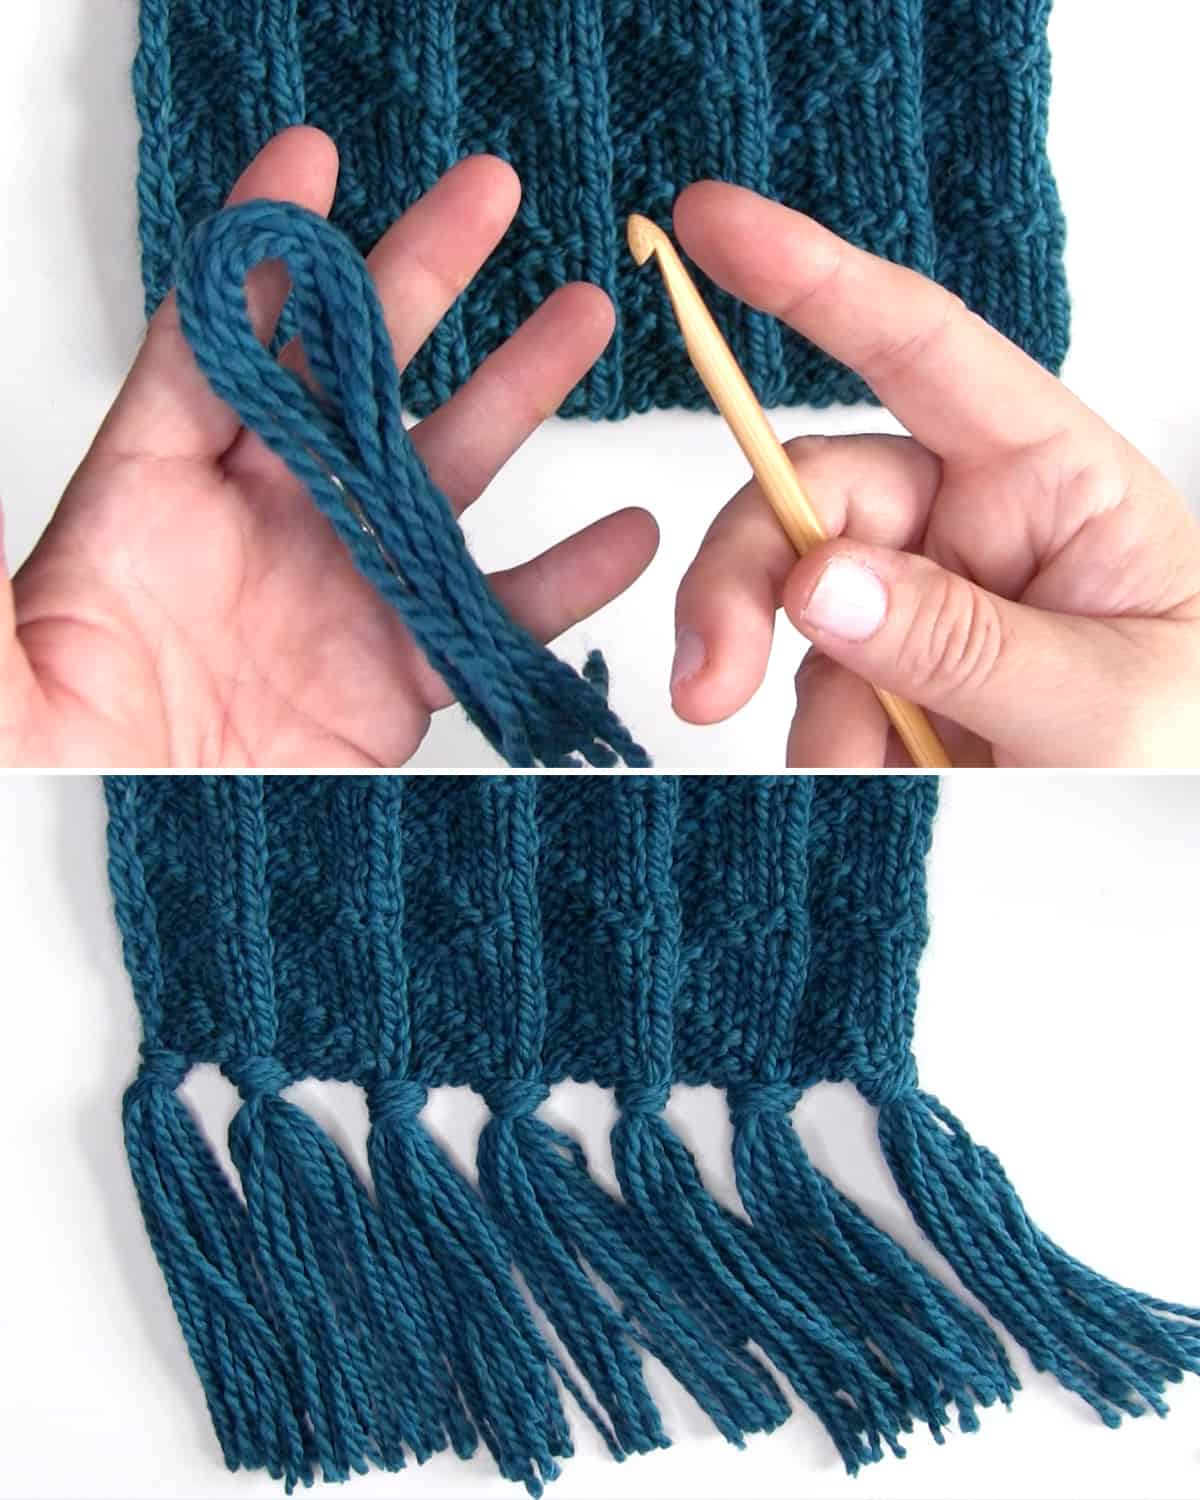 Adding fringe to a knitted scarf with yarn and a crochet hook.